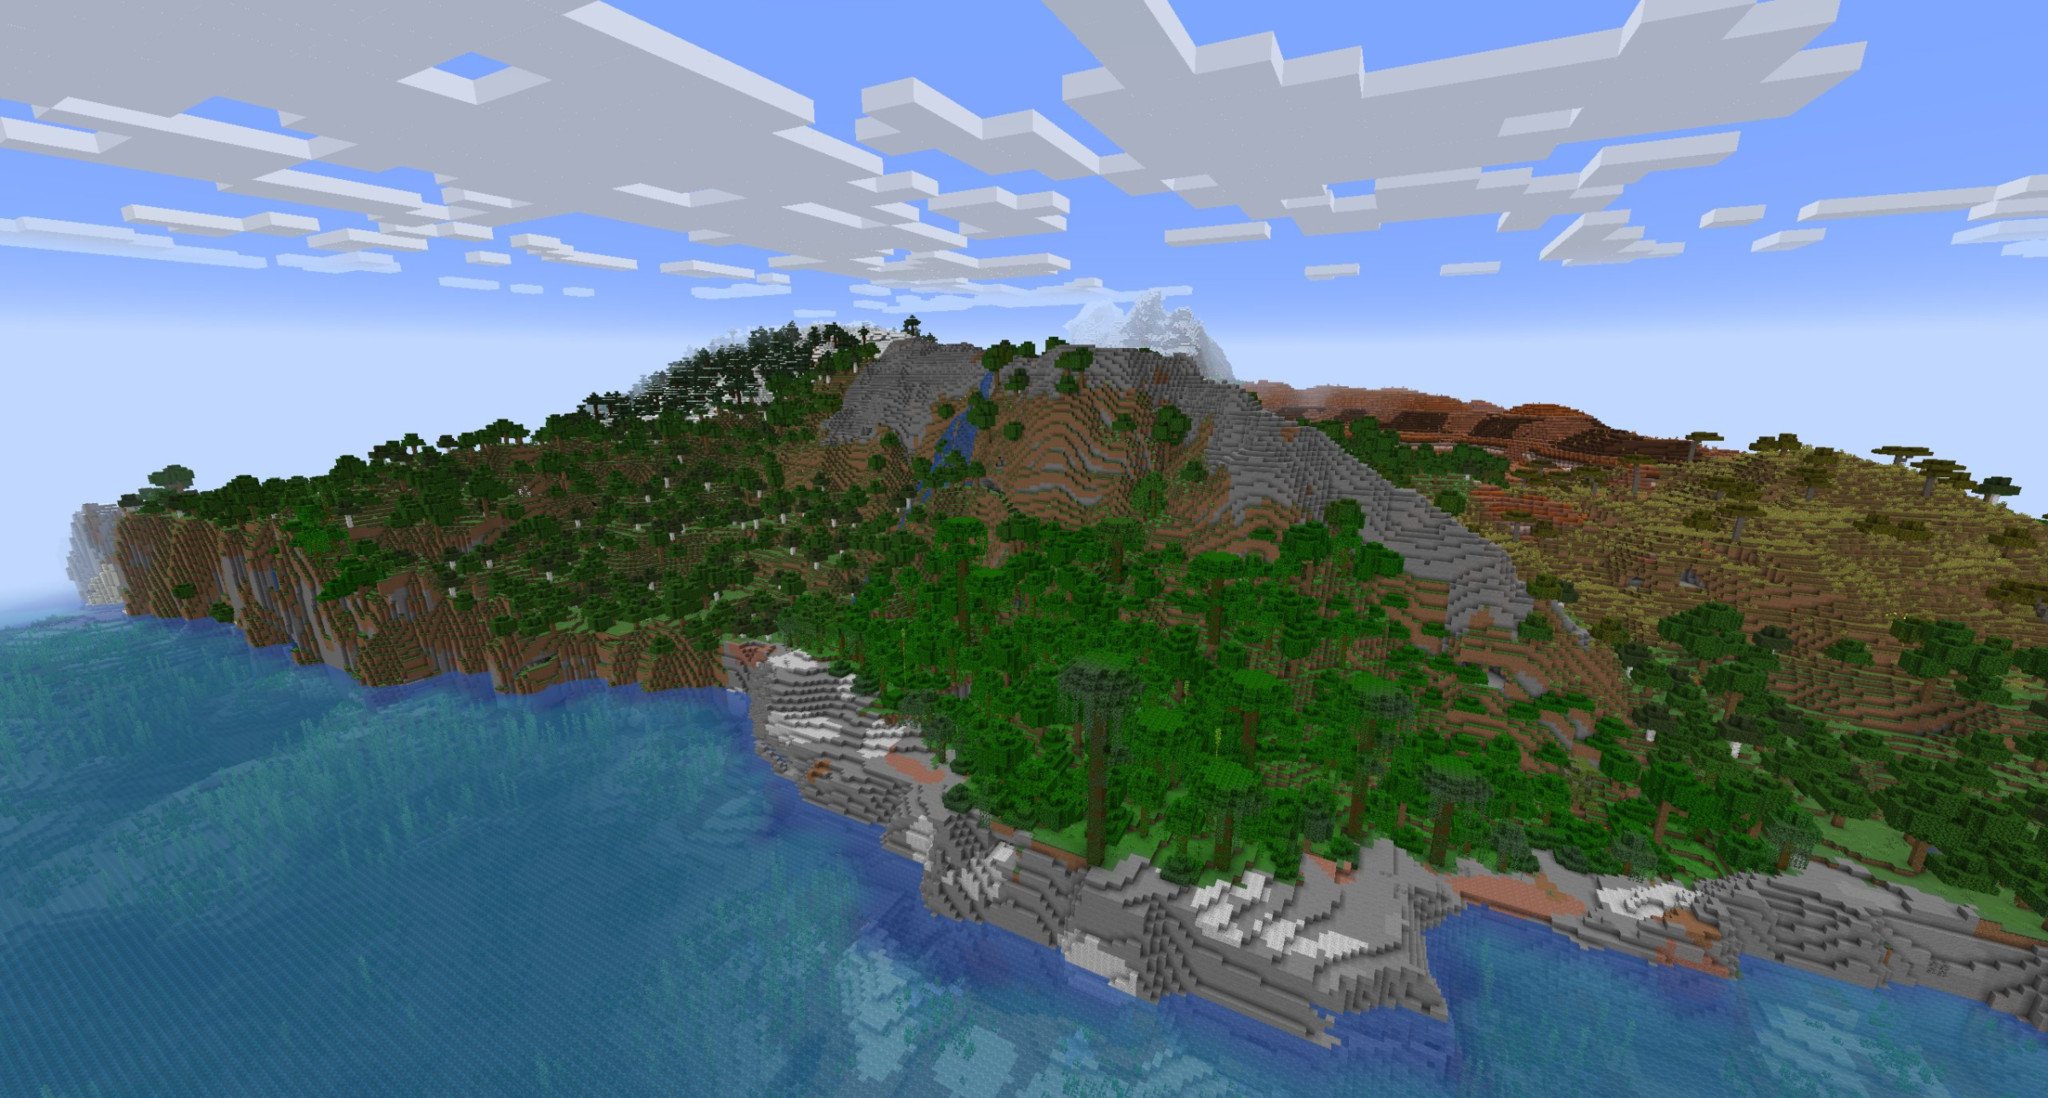 Minecraft Caves And Cliffs Update 1.18 Experimental Snapshot 3 Image